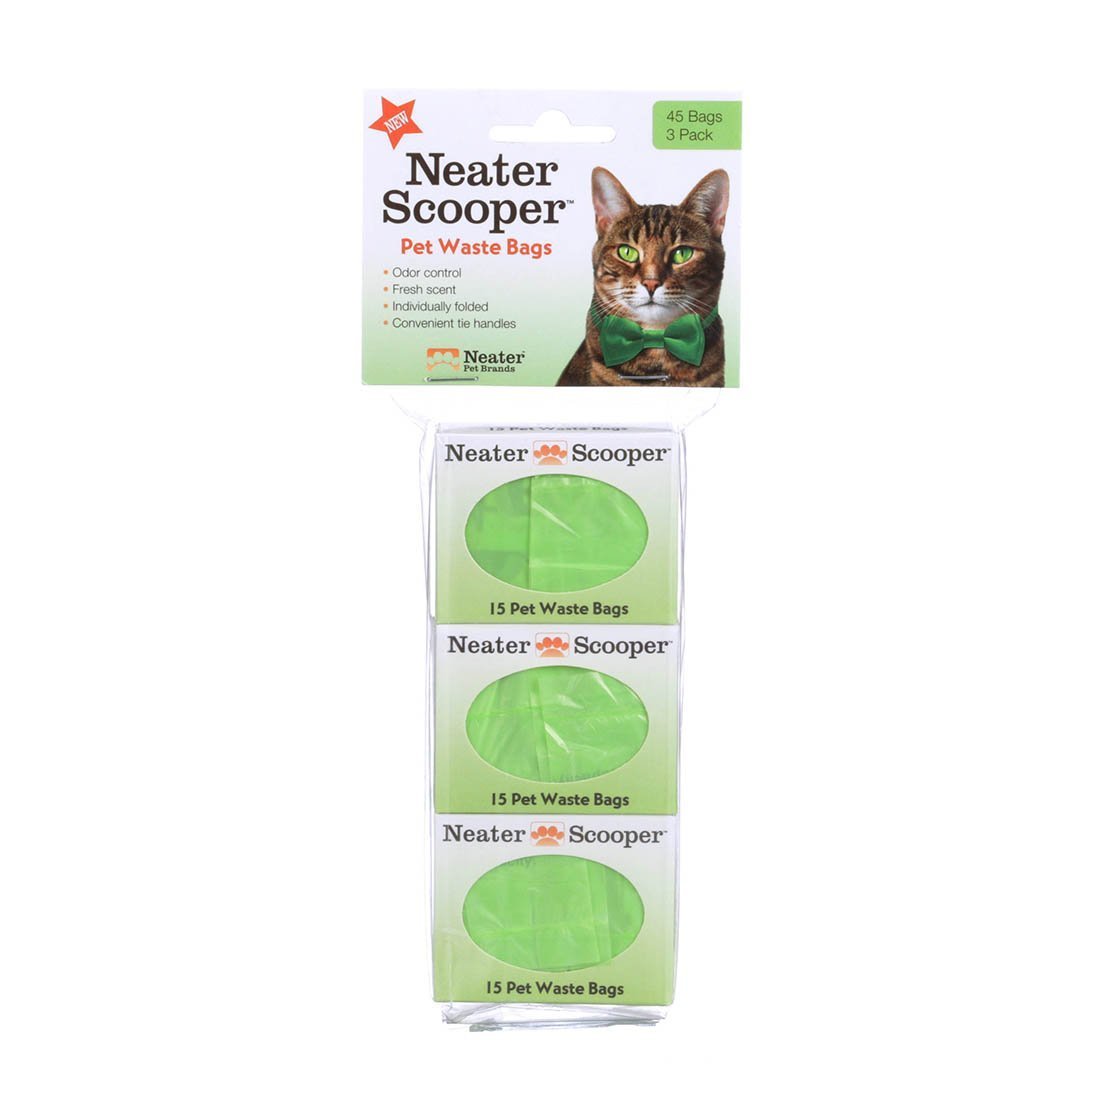 Neater Scooper Refill Bags 3 pack with 45 bags total